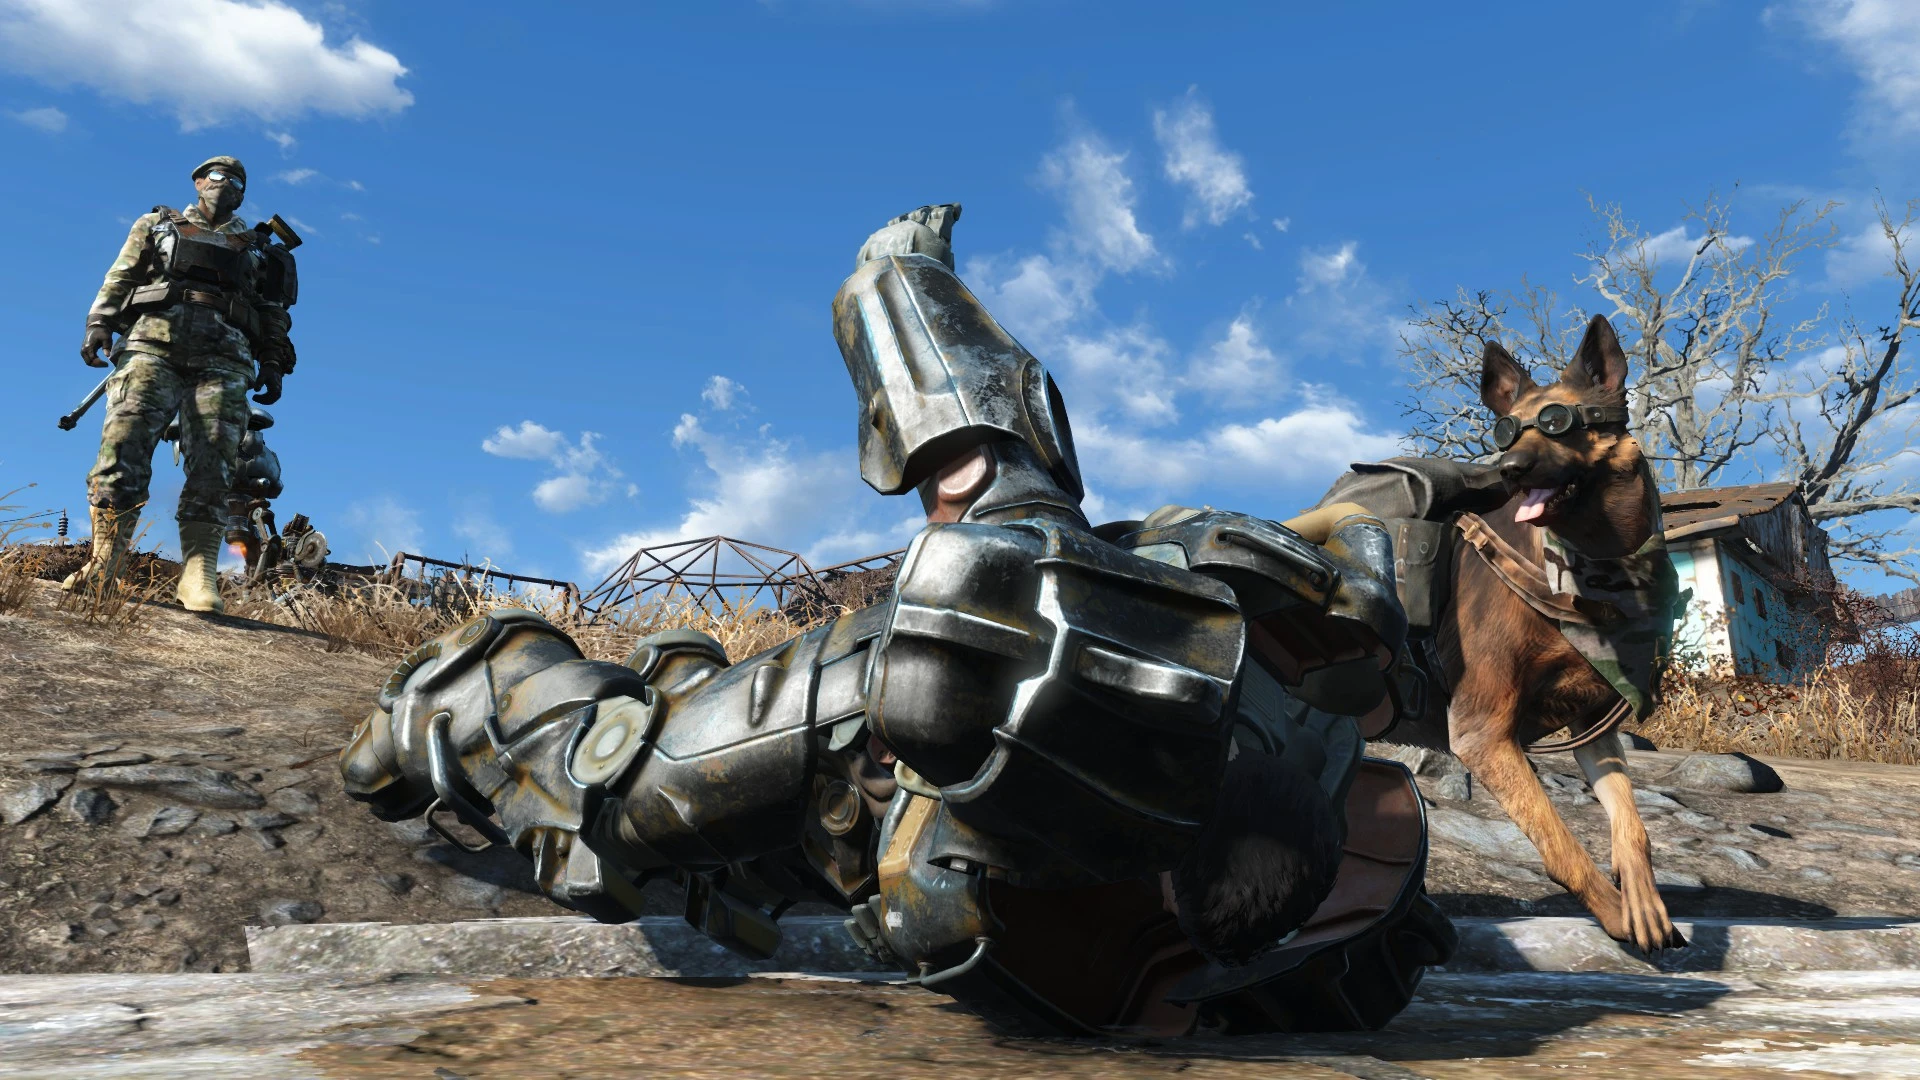 Https www fallout4 mods com. Фоллаут 4. Fallout 4 Exosuit. Fallout 4 моды. Лучшие моды фоллаут.